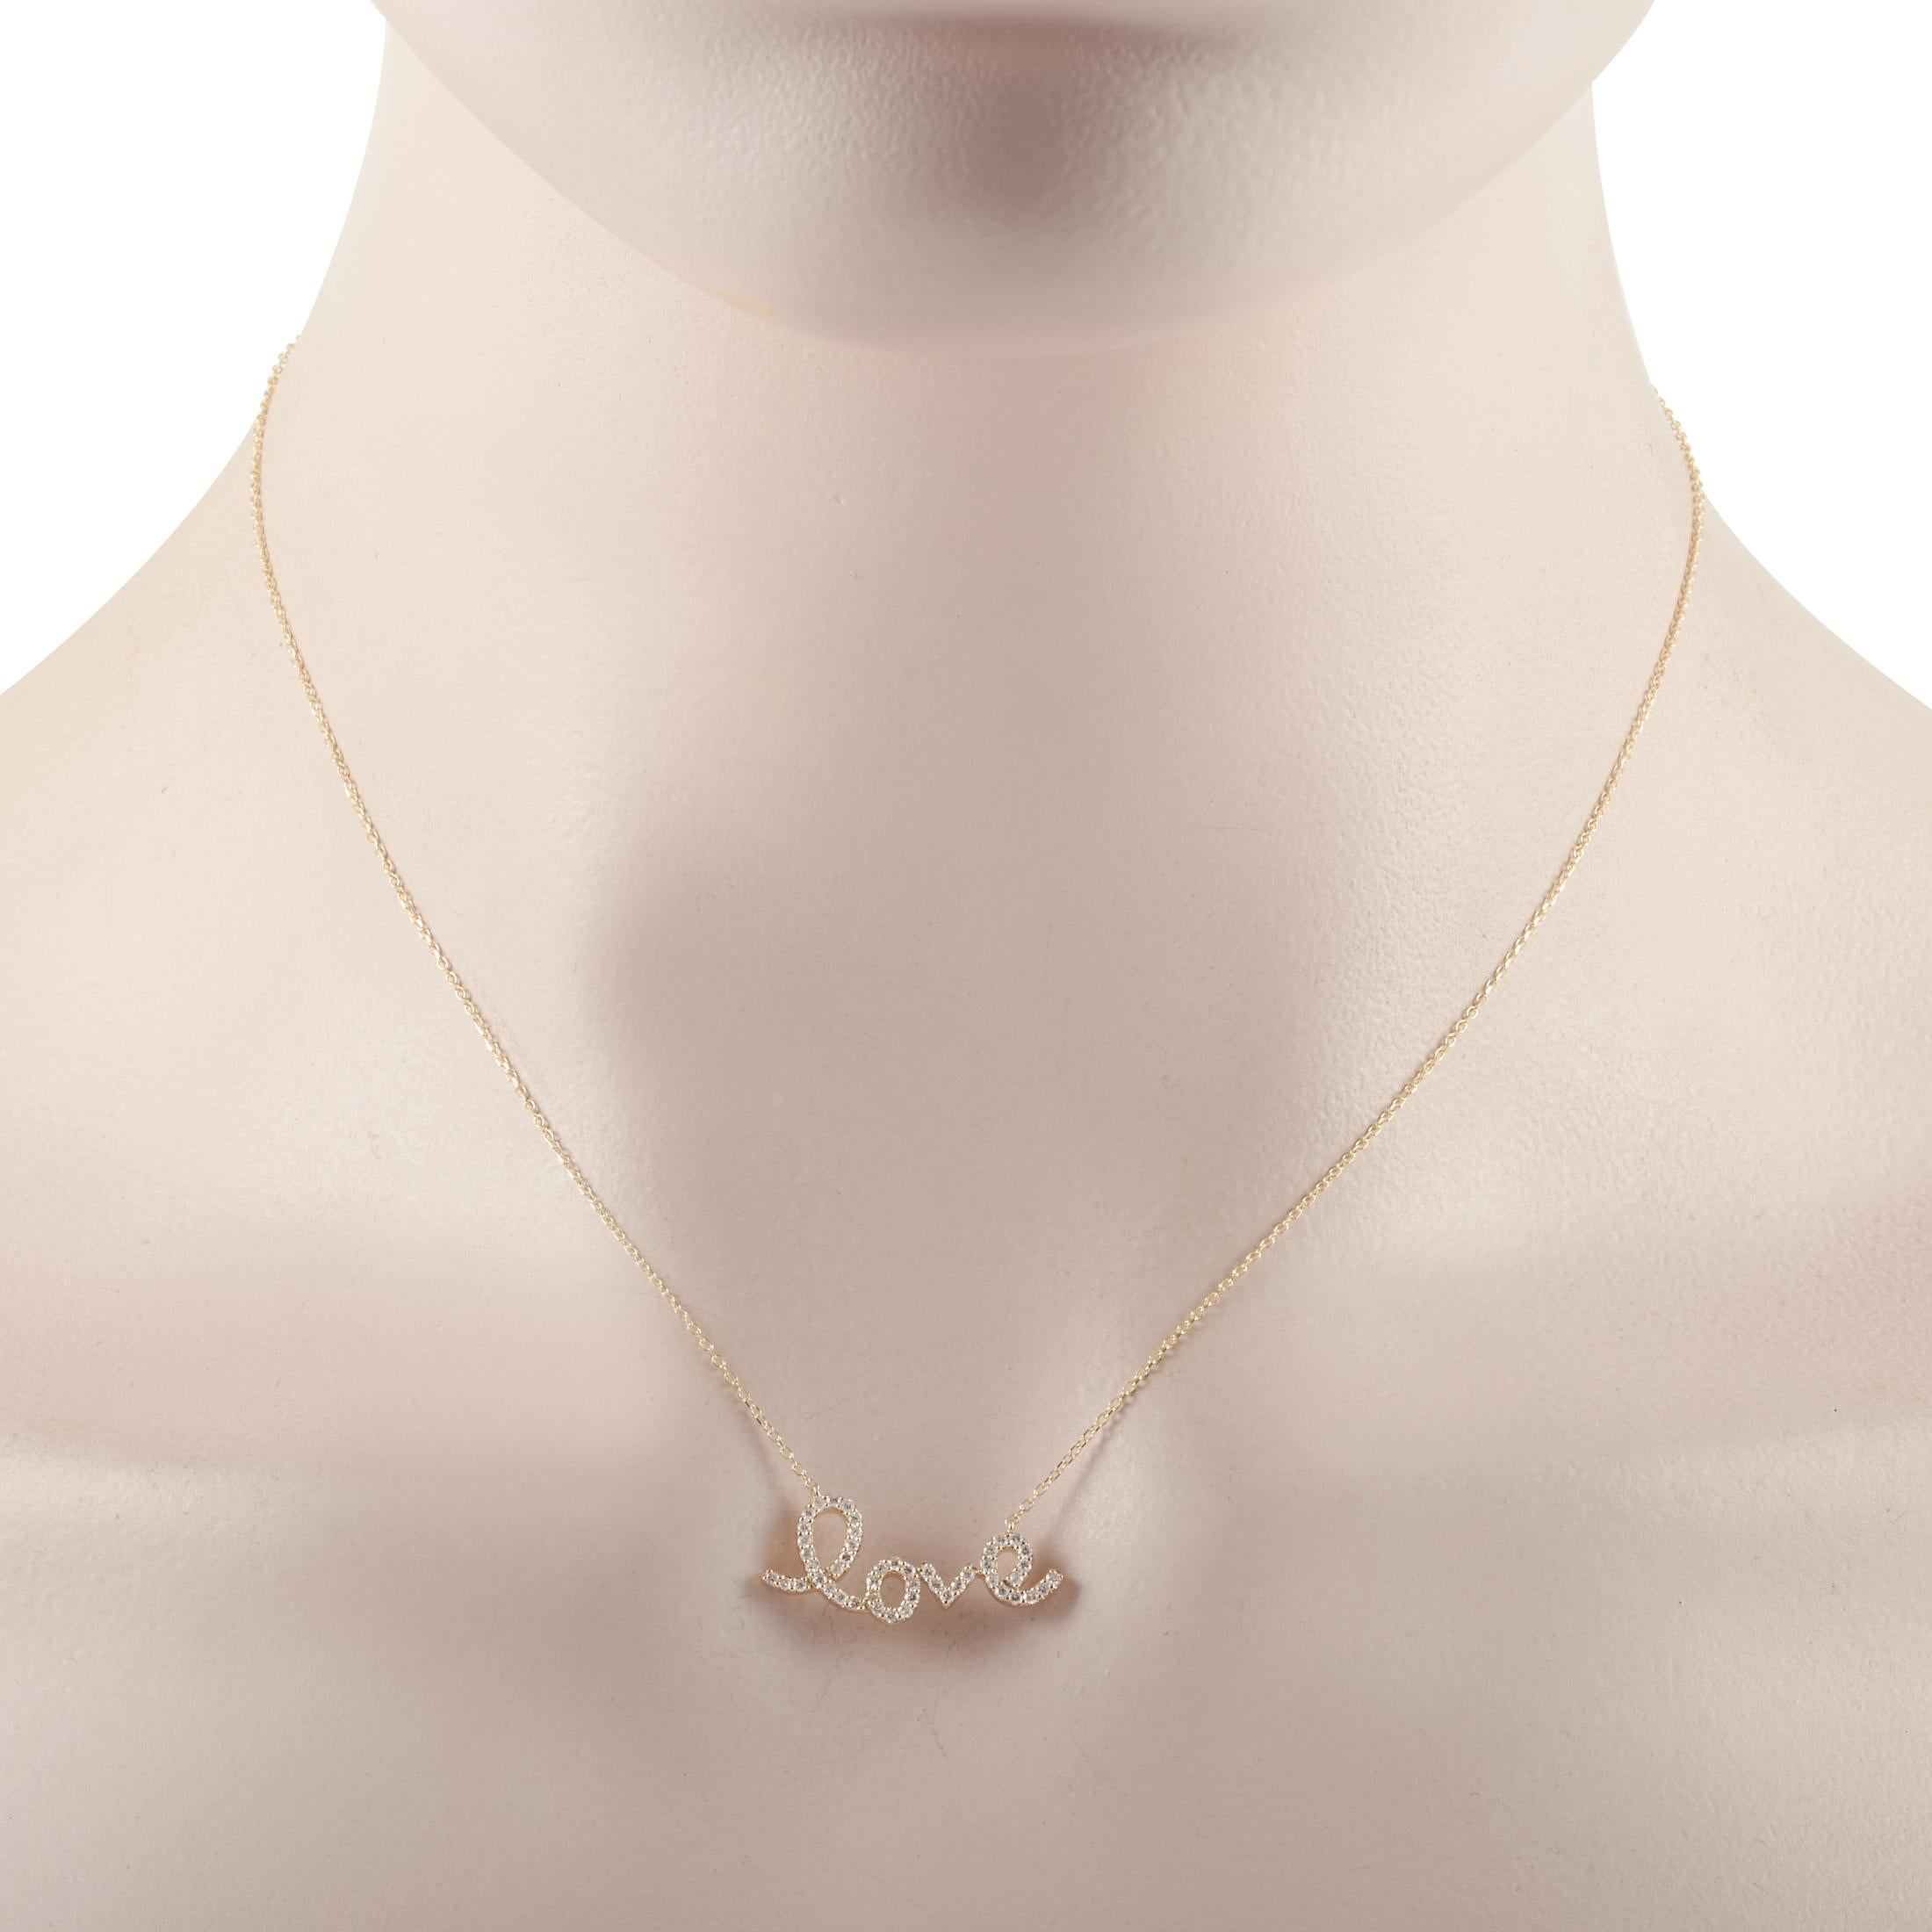 This LB Exclusive necklace is made of 14K yellow gold and embellished with diamonds that amount to 0.26 carats. The necklace weighs 2.5 grams and boasts a 15” chain and a “love” pendant that measures 0.38” in length and 1” in width.
 
 Offered in